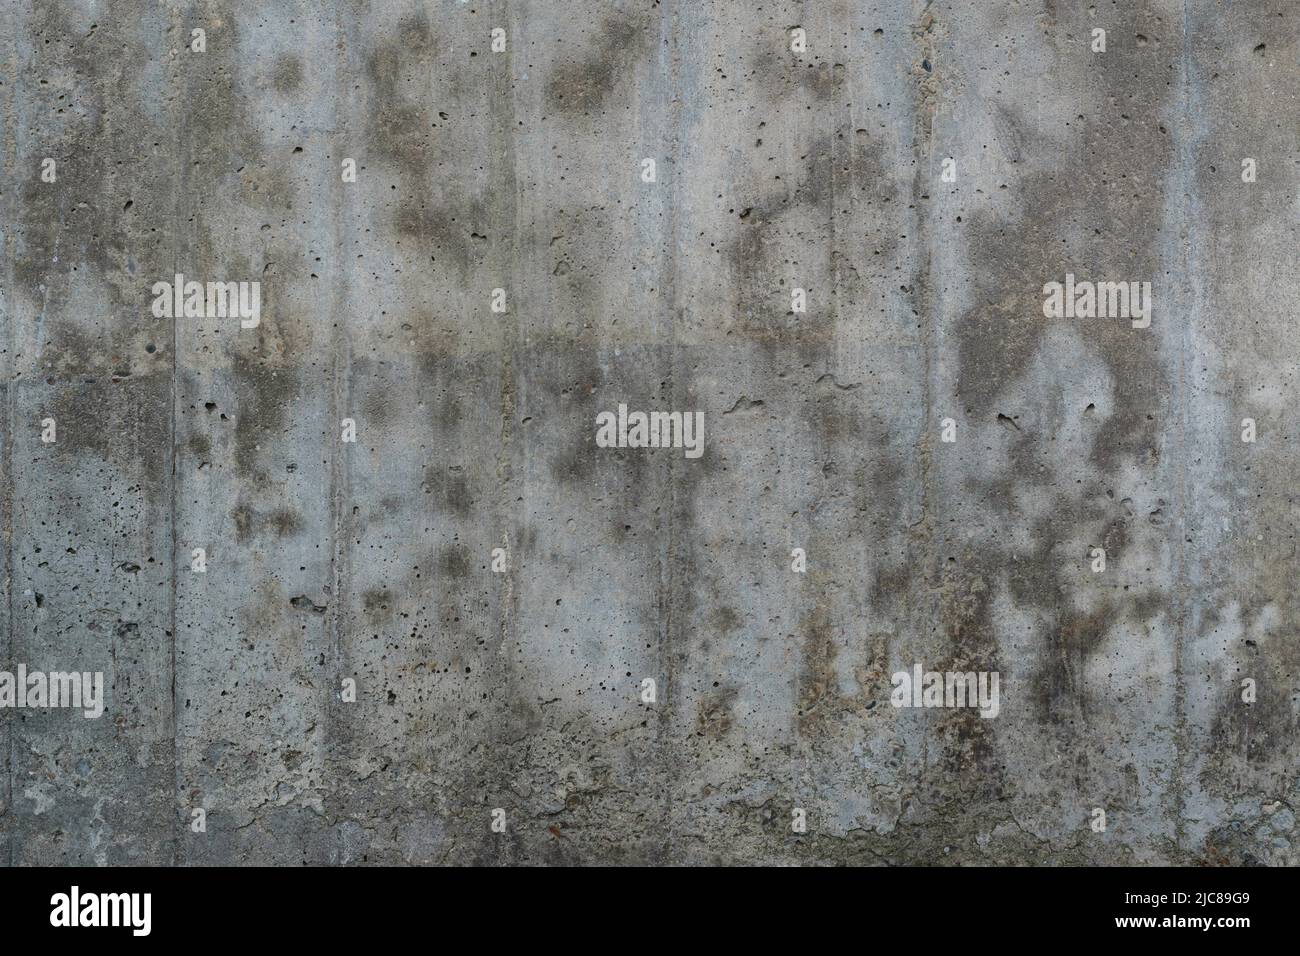 Texture of old reinforced concrete surface. Flat reinforced concrete surface with traces of wooden formwork, covered with dark spots, background. Stock Photo